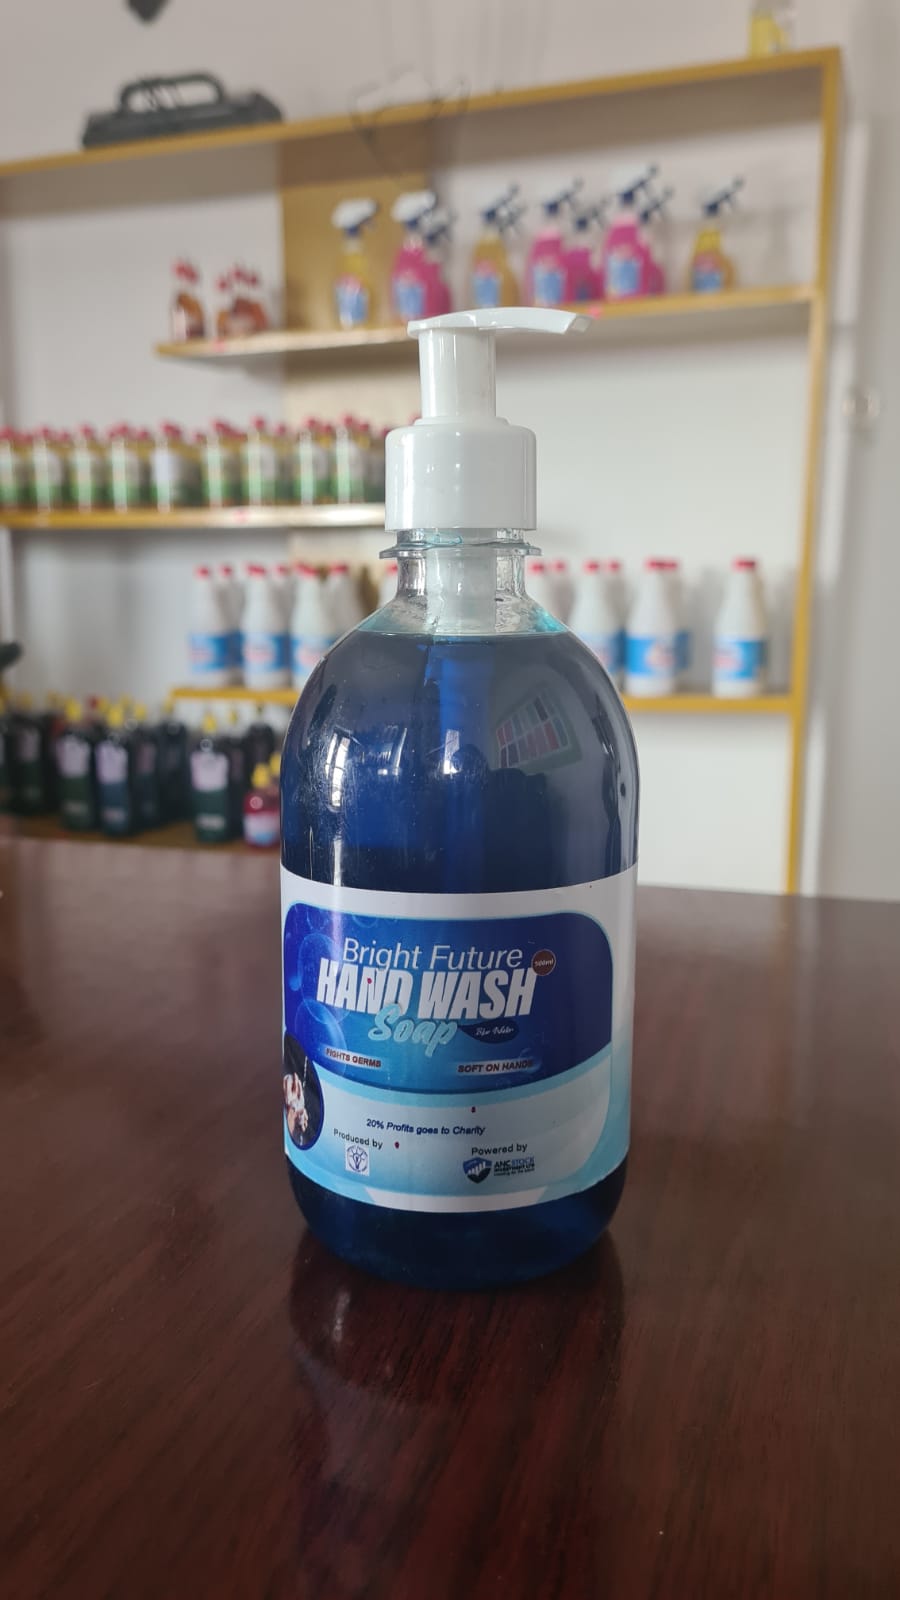 Hand wash Soap 1,500frs